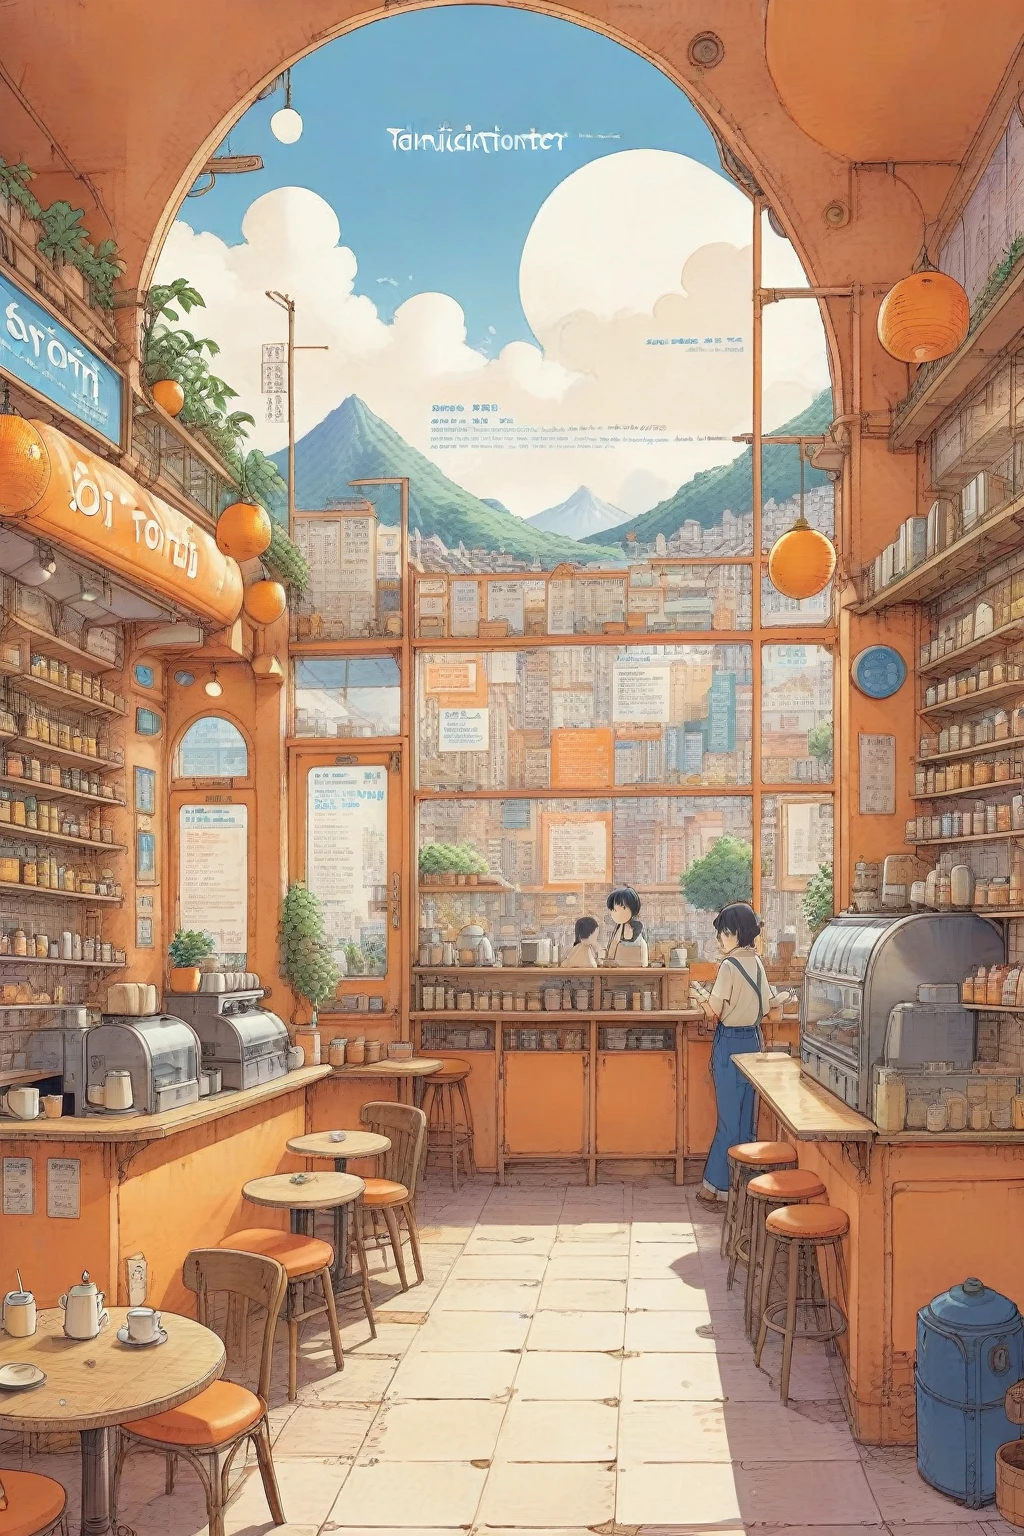 ON PARCHMENT,INK ILLUSTRATION,
((anime:1.4,illustration)),(masterpiece, top quality, best quality),(ultra-detailed, absolutely resolution),((16k, high res)), (((Cross-section of an orange, a refreshing city spreading out within the orange,)) ((cozy lofi illustration:1.4)), ((anime:1.4, illustration)),(masterpiece, top quality, best quality),(ultra-detailed, absolutely resolution),((16k, high res)) BREAK {lofi art, style of Laurie Greasley, style of Makoto Shinkai, anime aesthetic}, A detailed blueprint of the section of Lofi cafe, a fairytale-style cafe, detailed labeling text, grid lines,